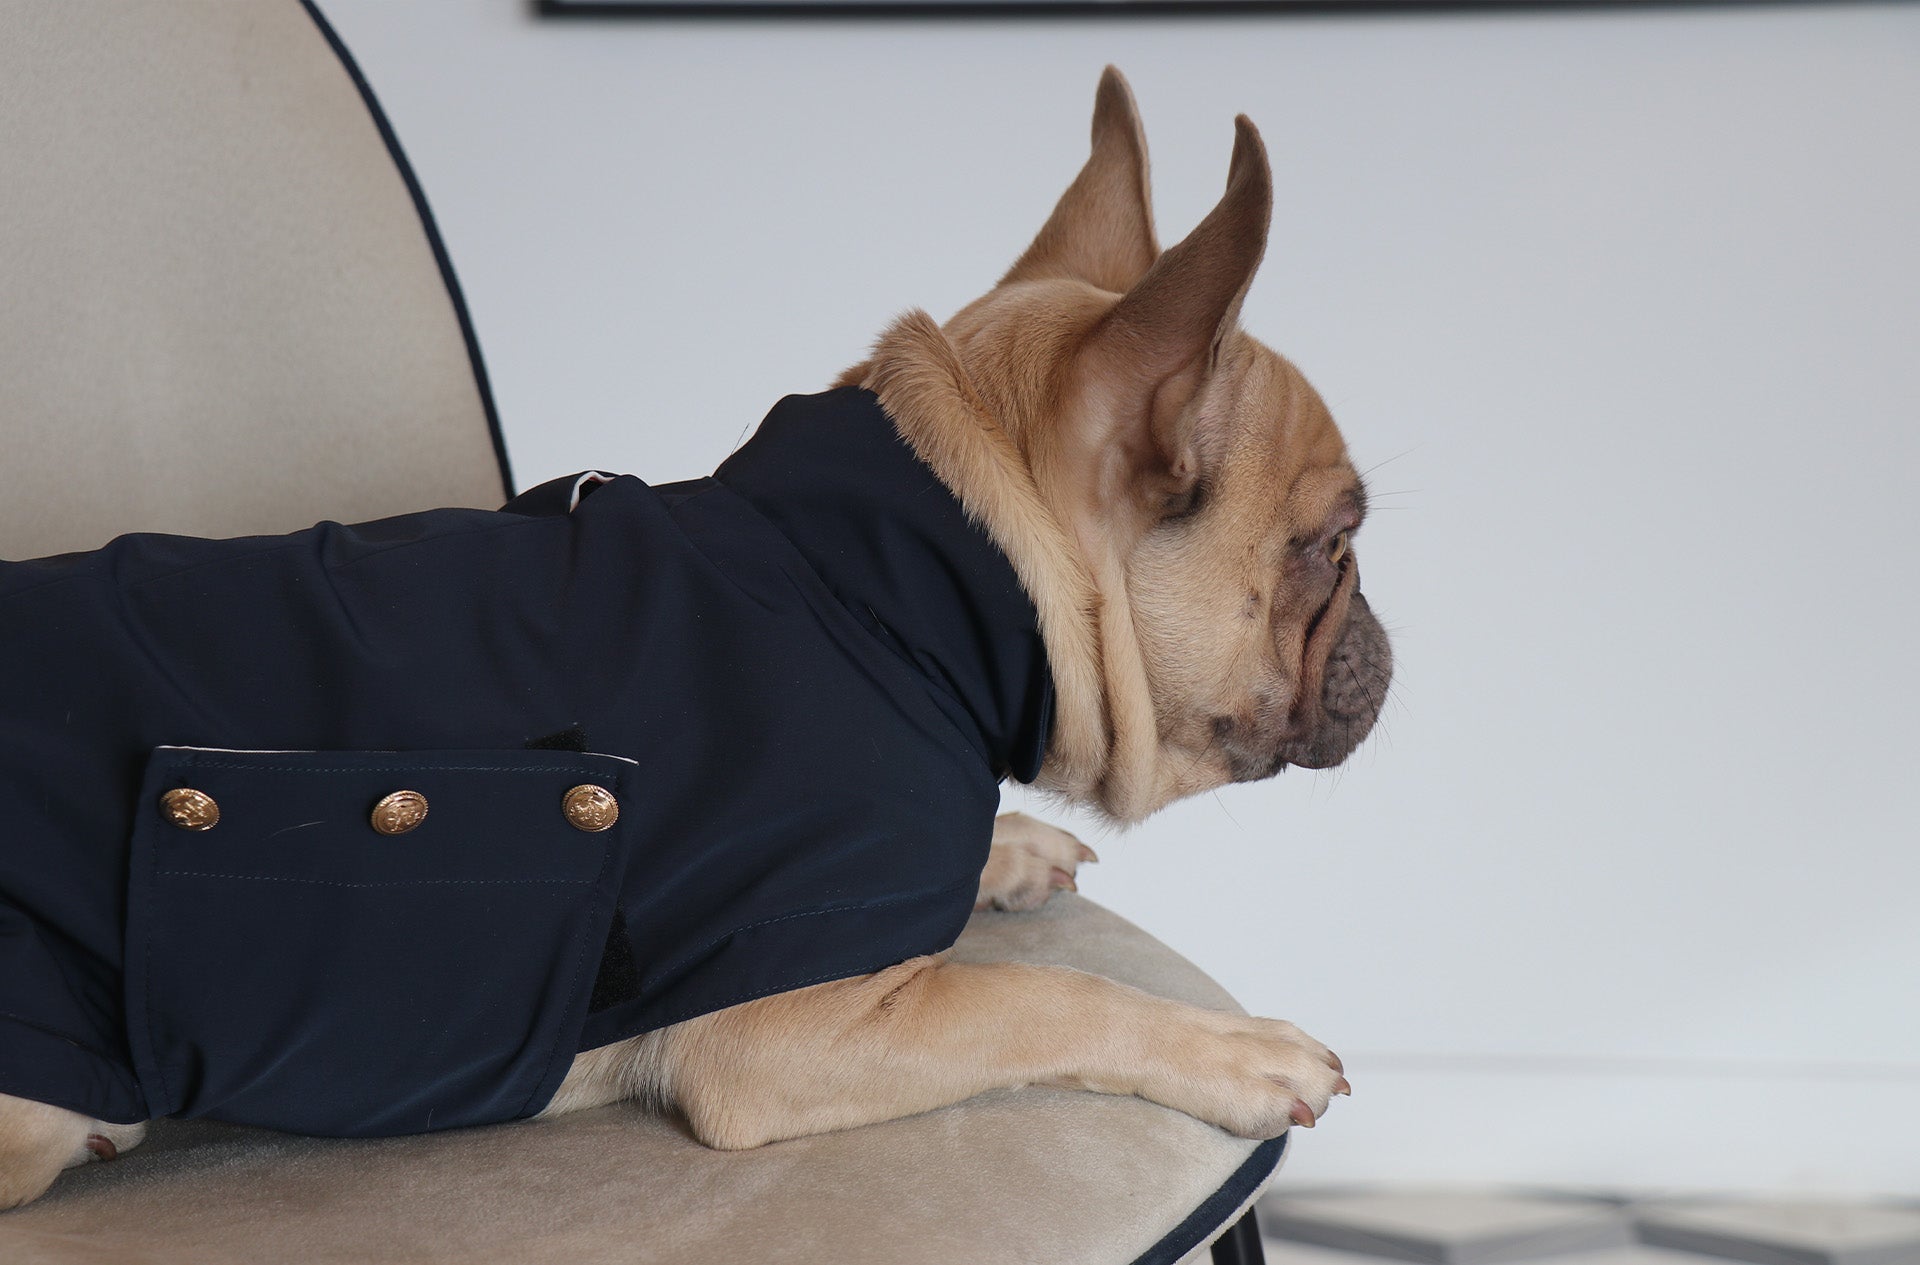 A dog wearing an Over Glam Thin Coat on a chair